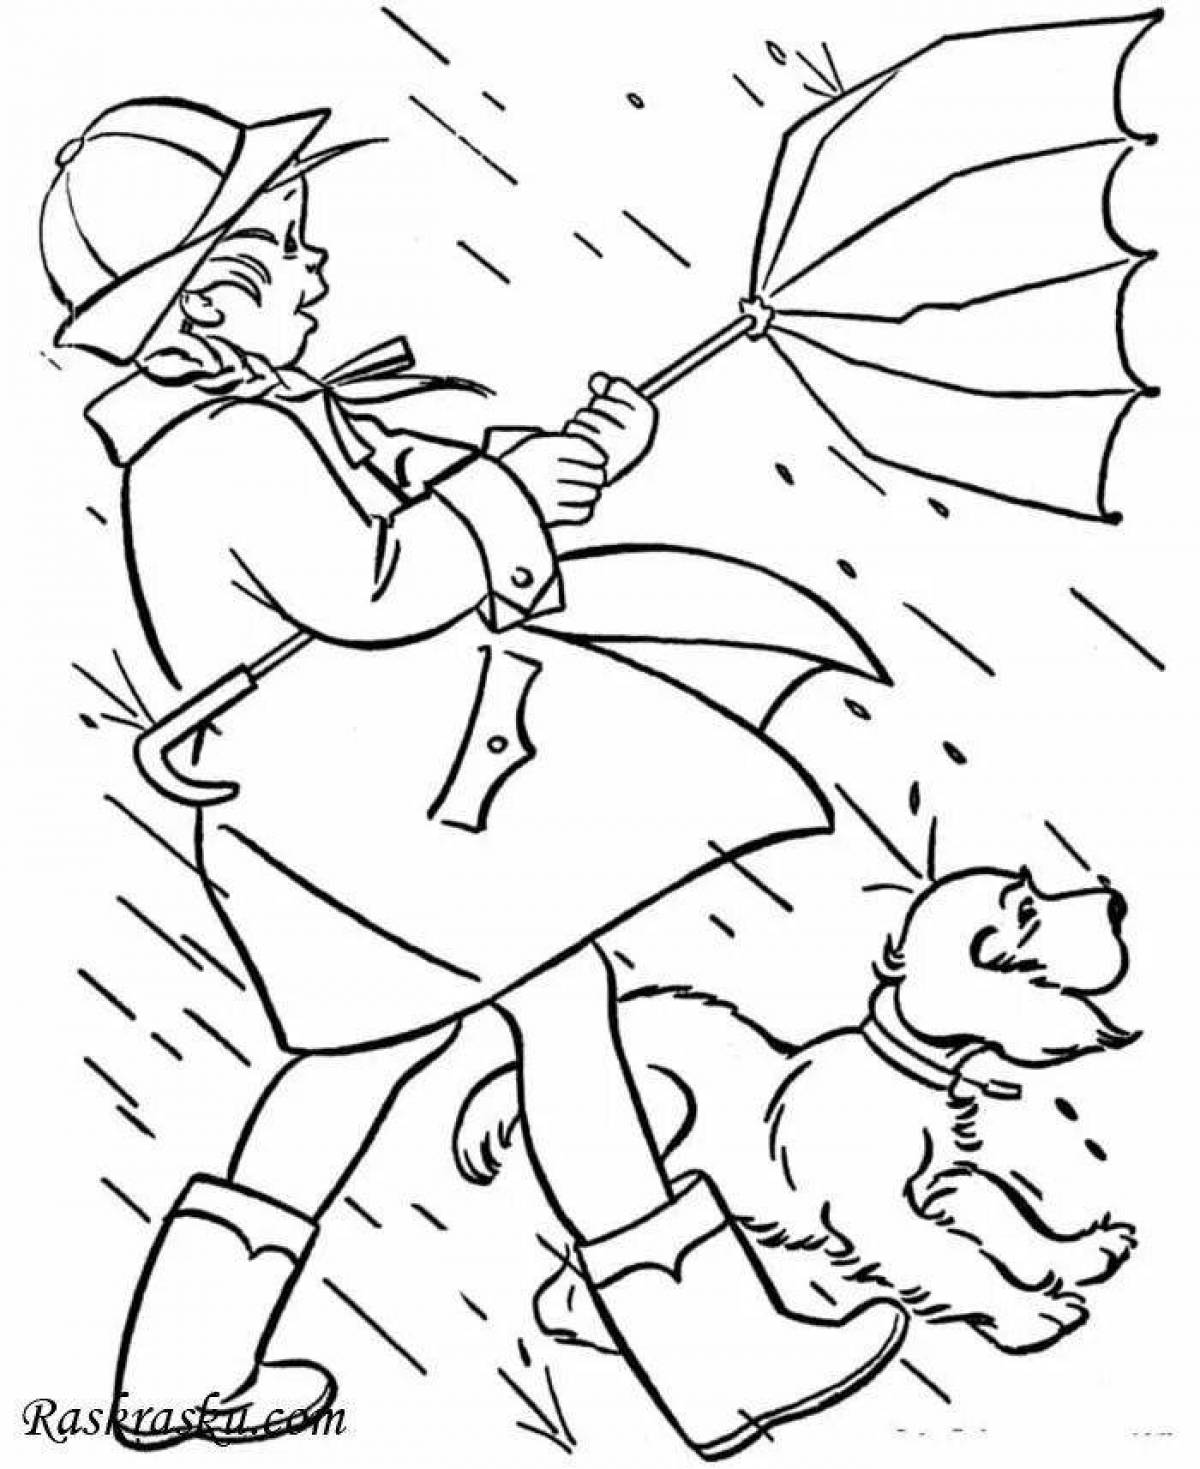 Calming wind coloring page